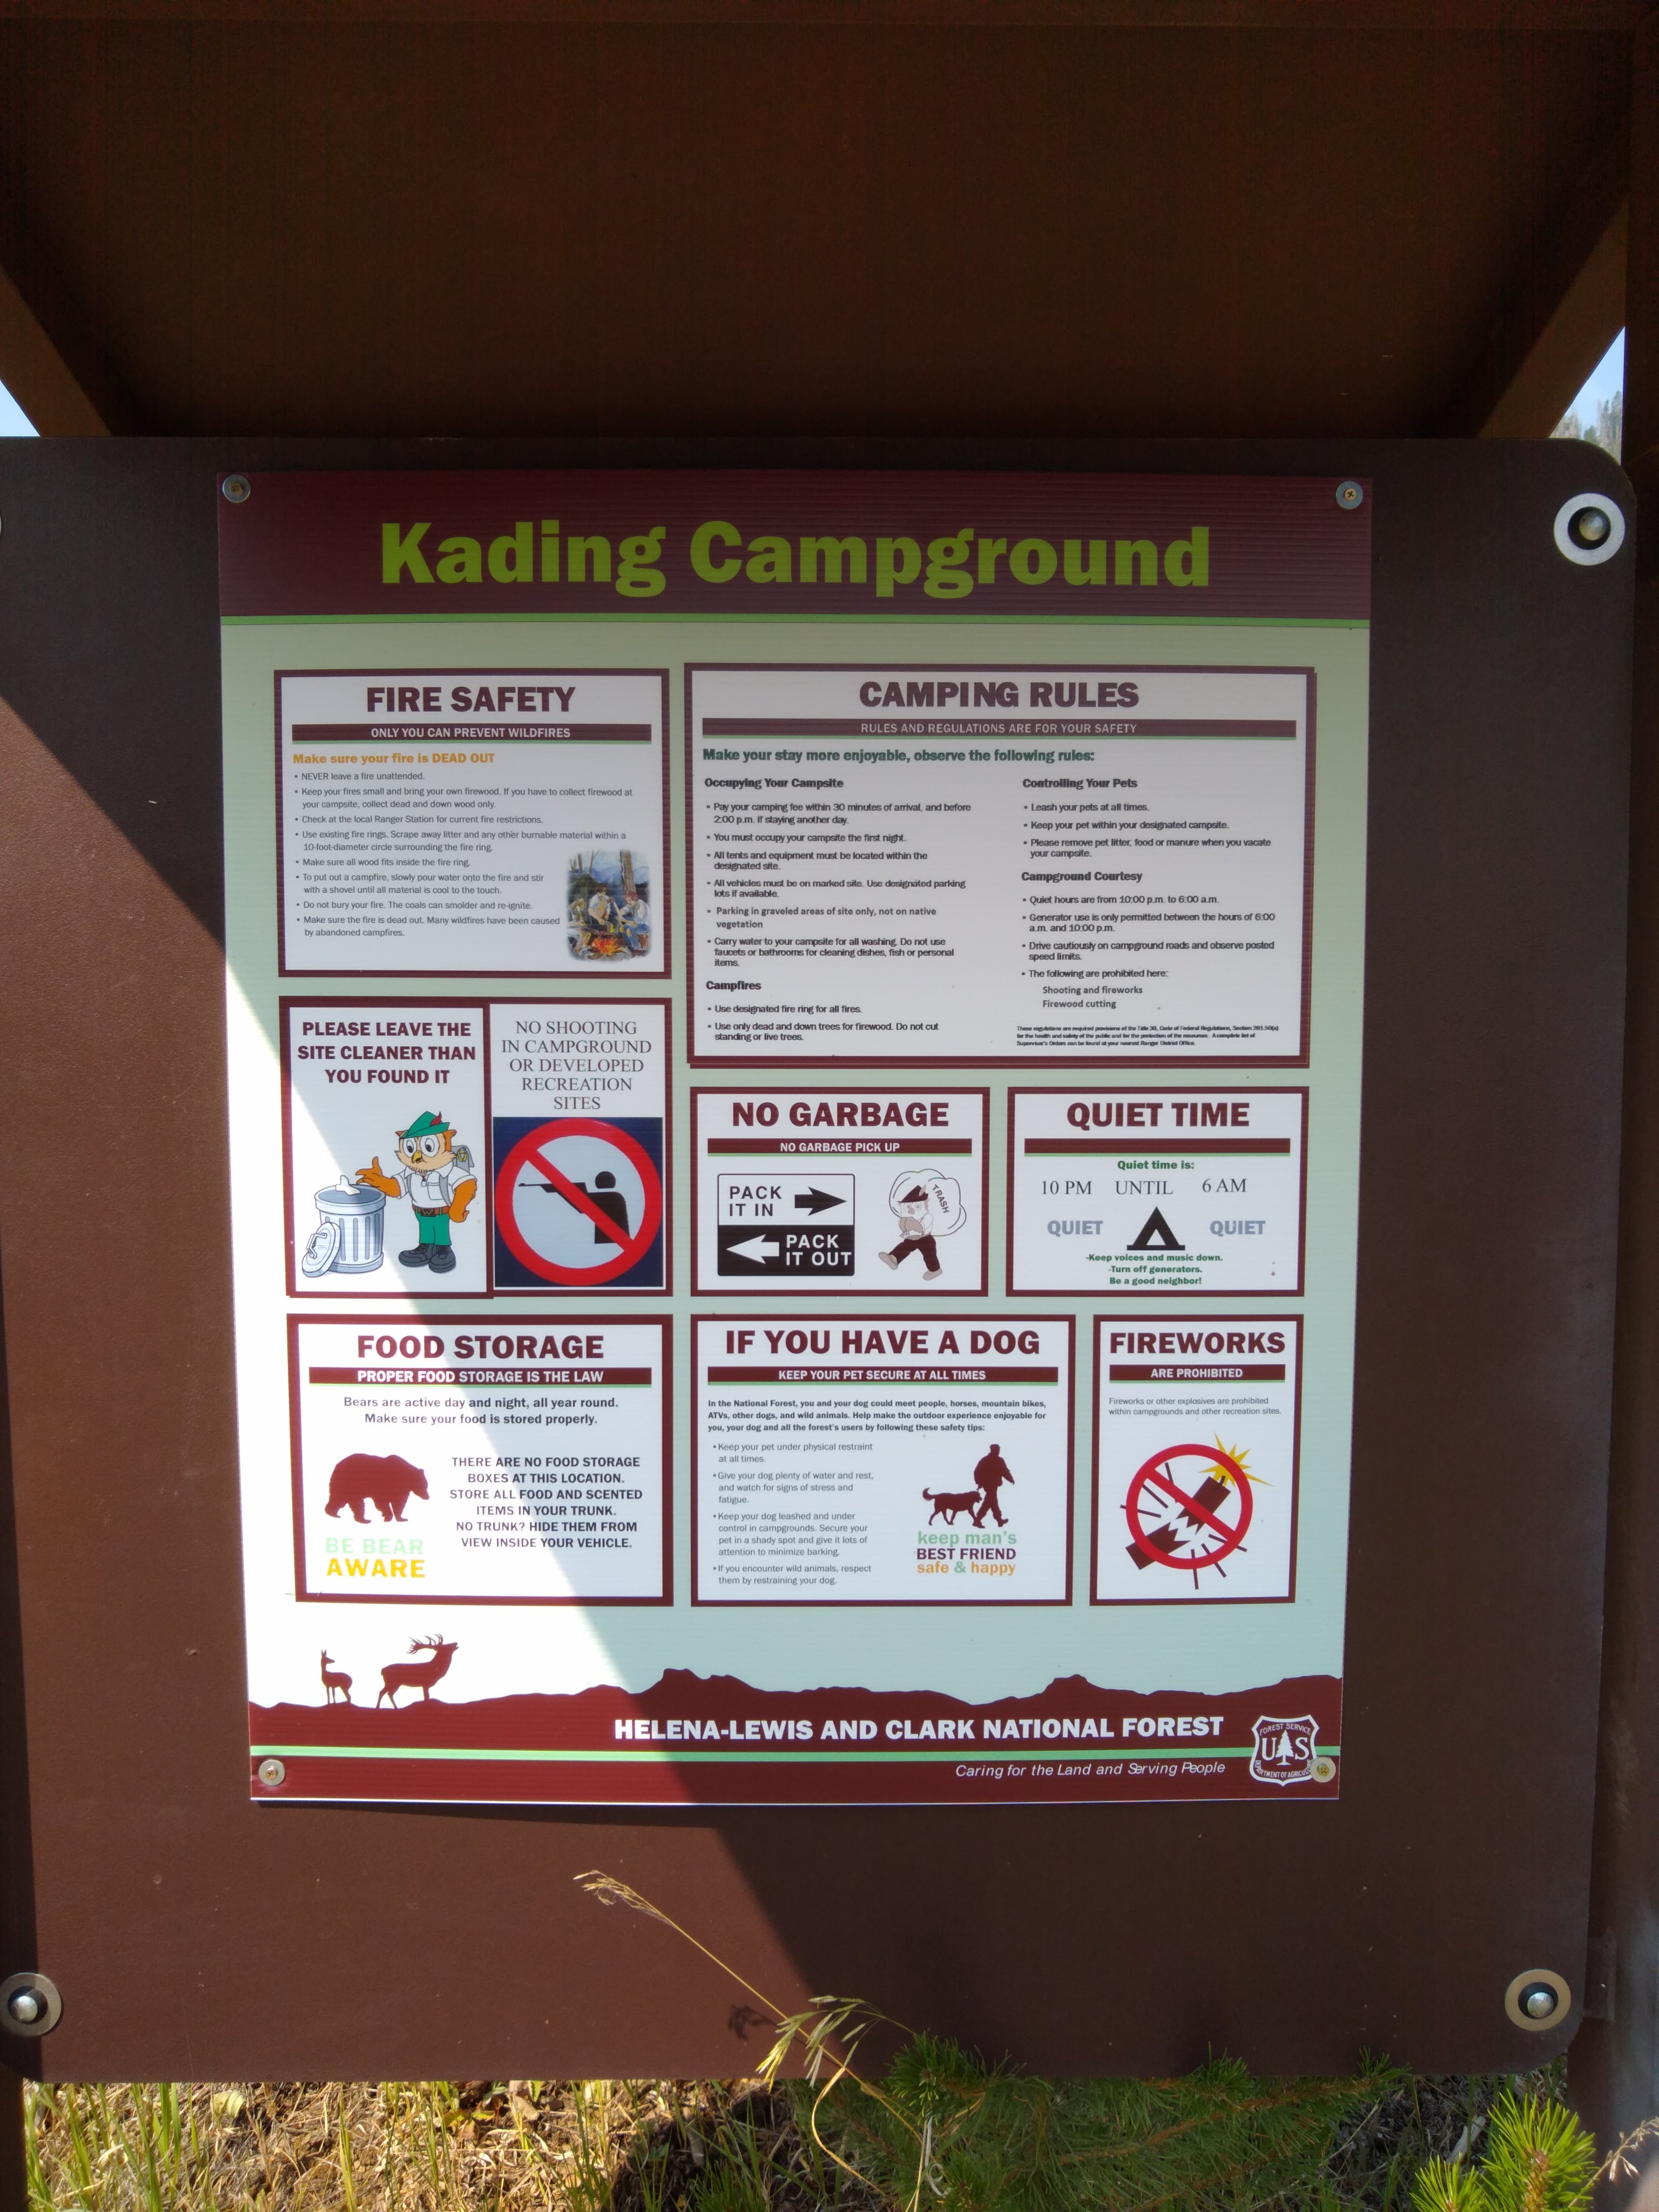 Camper submitted image from Kading Campground  - 5